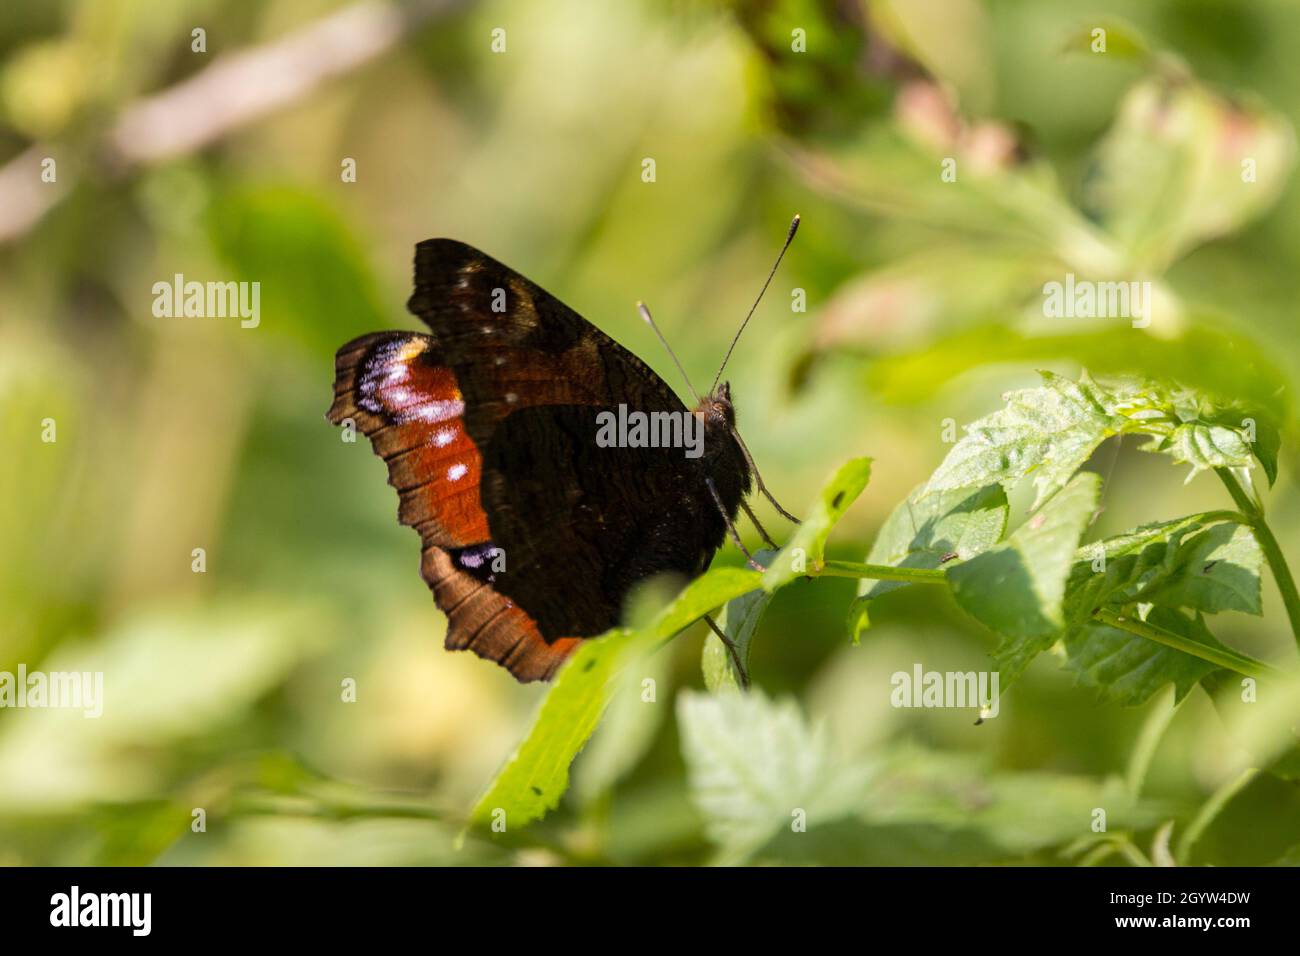 Peacock butterfly (Inachis io) maroon upper wing with white and purple false eye markings smoky brown underwing sun bathing part open wings Stock Photo